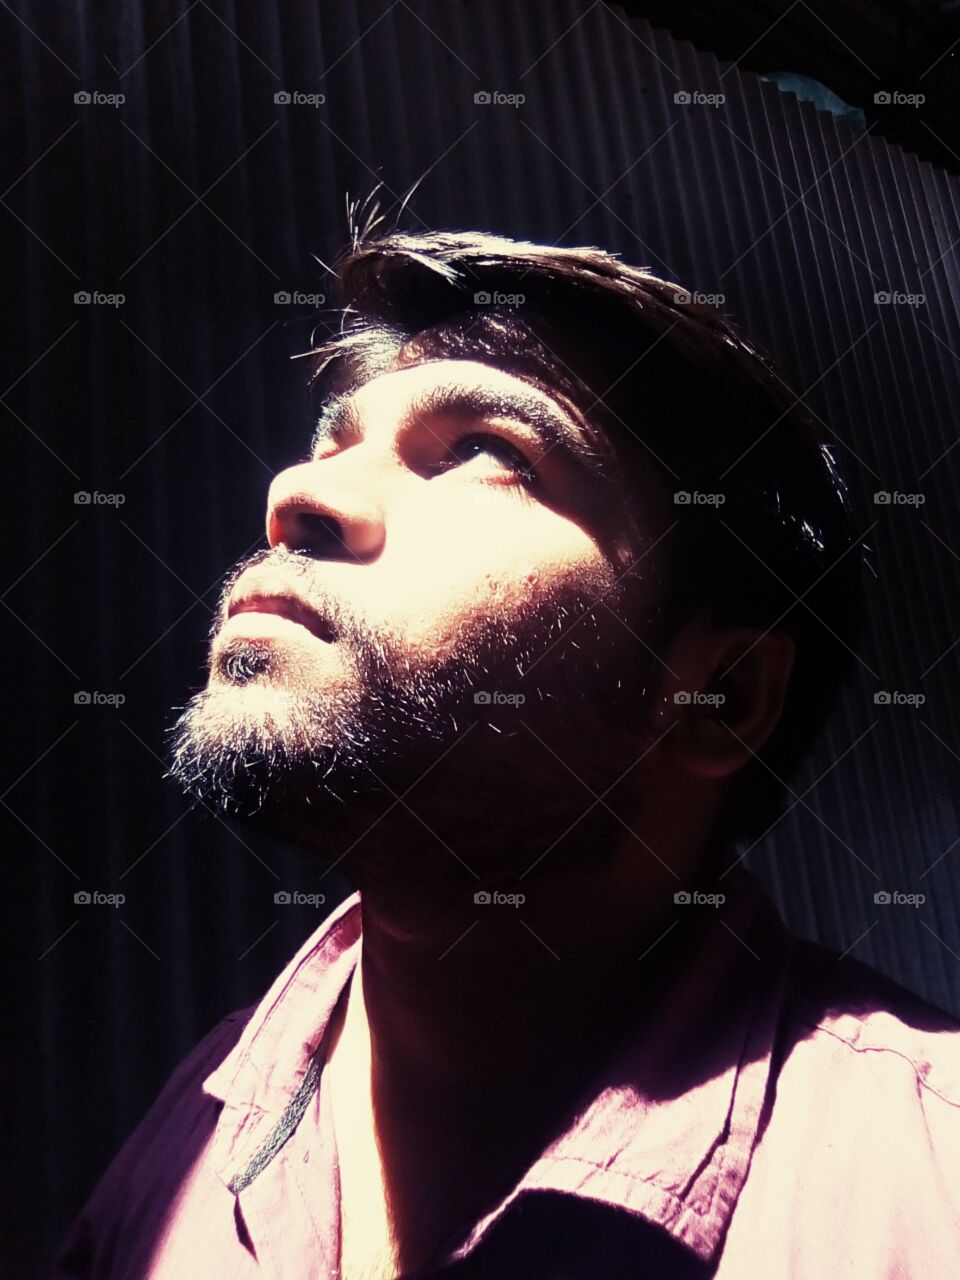 Fighting with Darkness !
Man with hope see towards sky dare to face the problems dare to fight sadness.
His beard show his patient !
His head up show his attitude to never give up !
His expression say I never giveup !
His eye towards target egear !